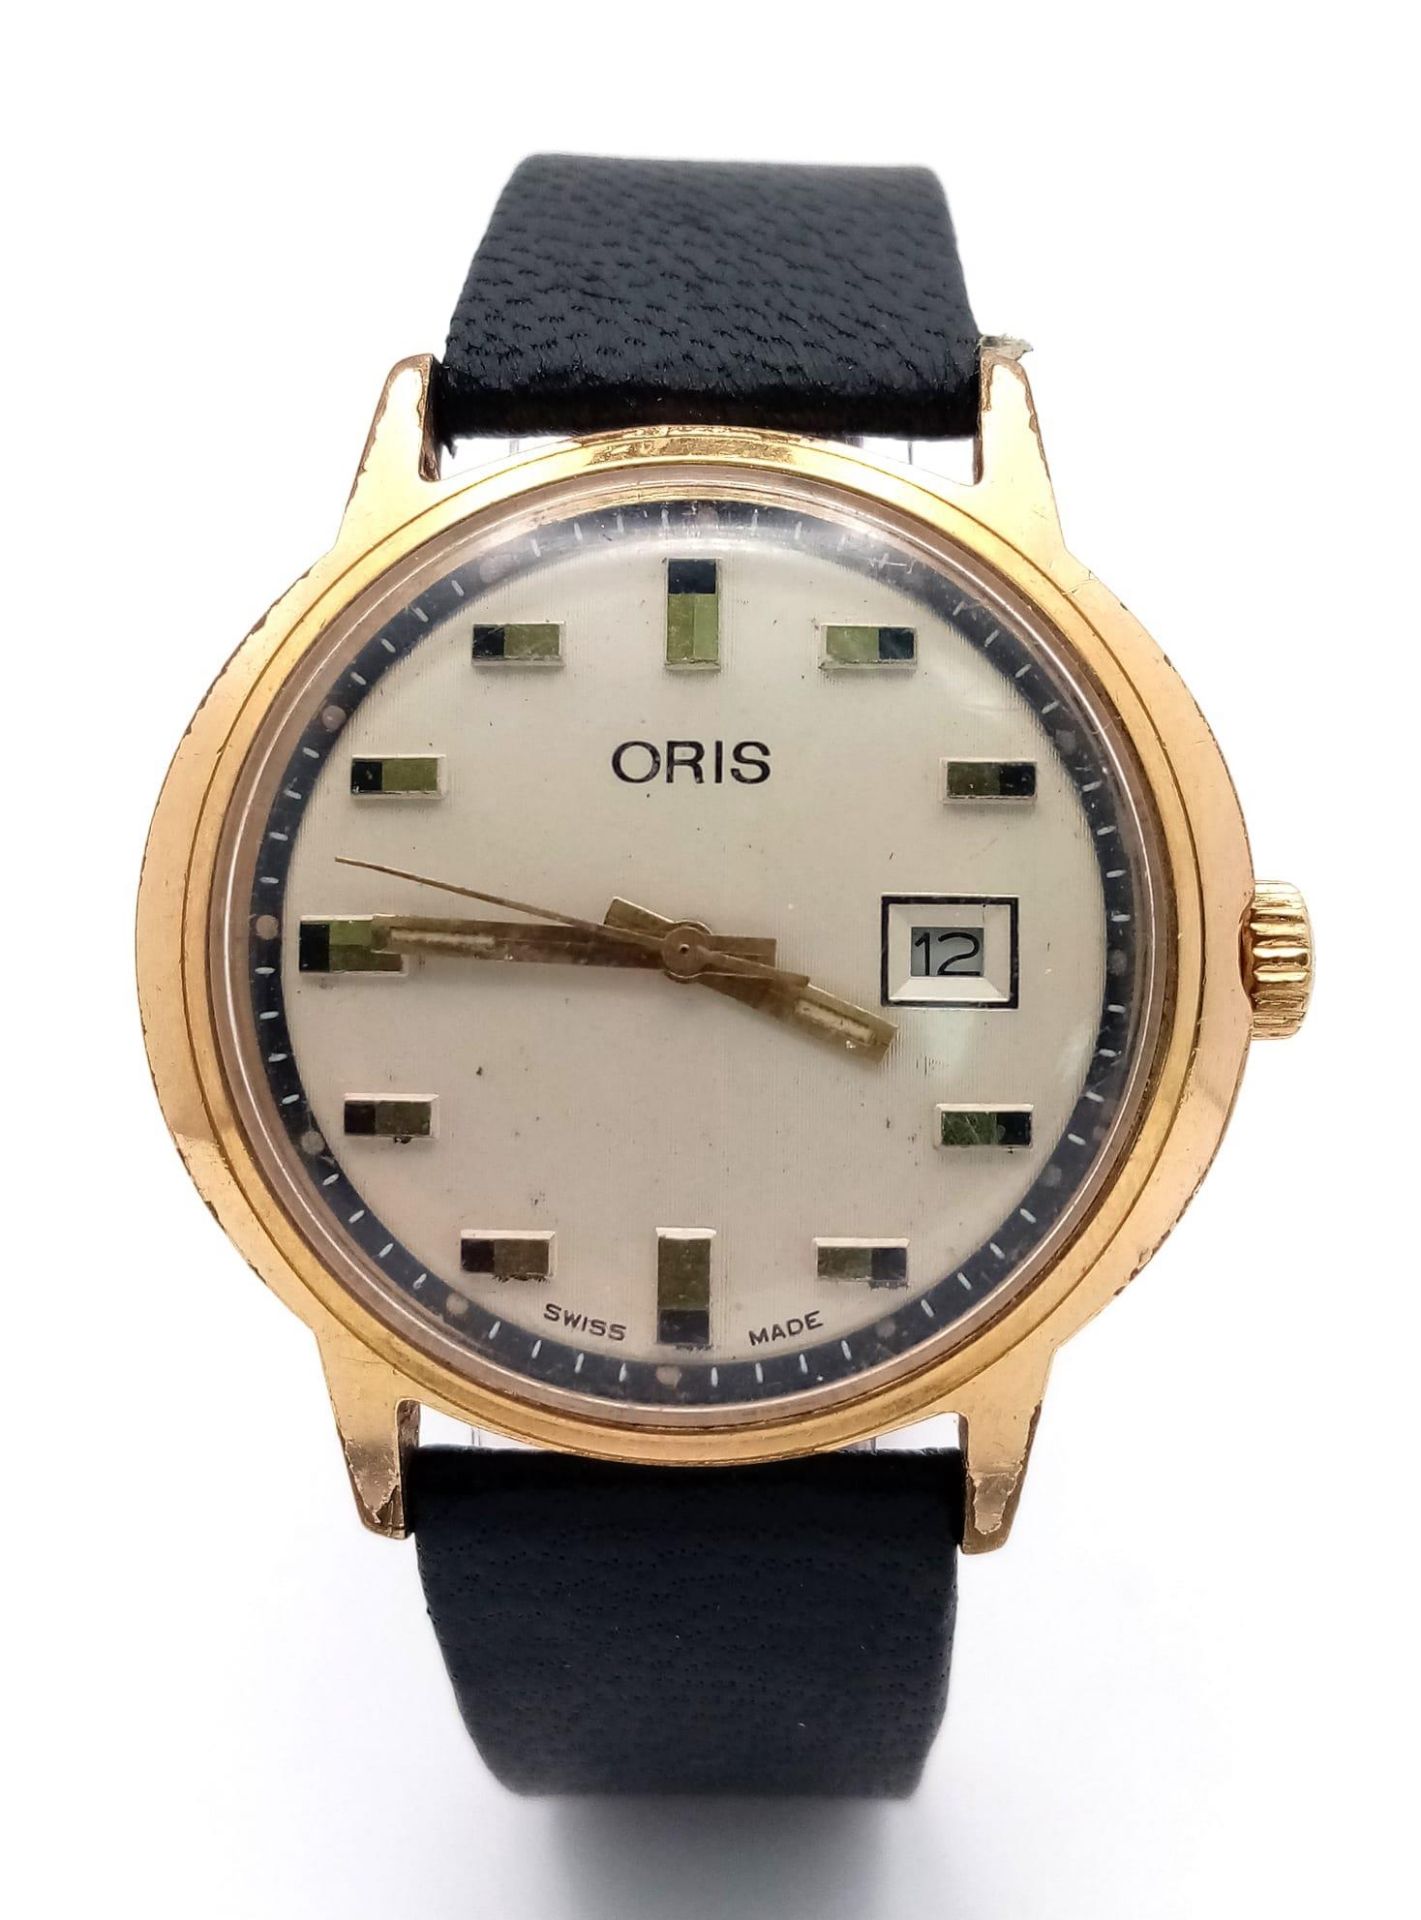 A Vintage Oris Gents Watch. Mechanical movement. Not currently working so A/F. - Bild 2 aus 5